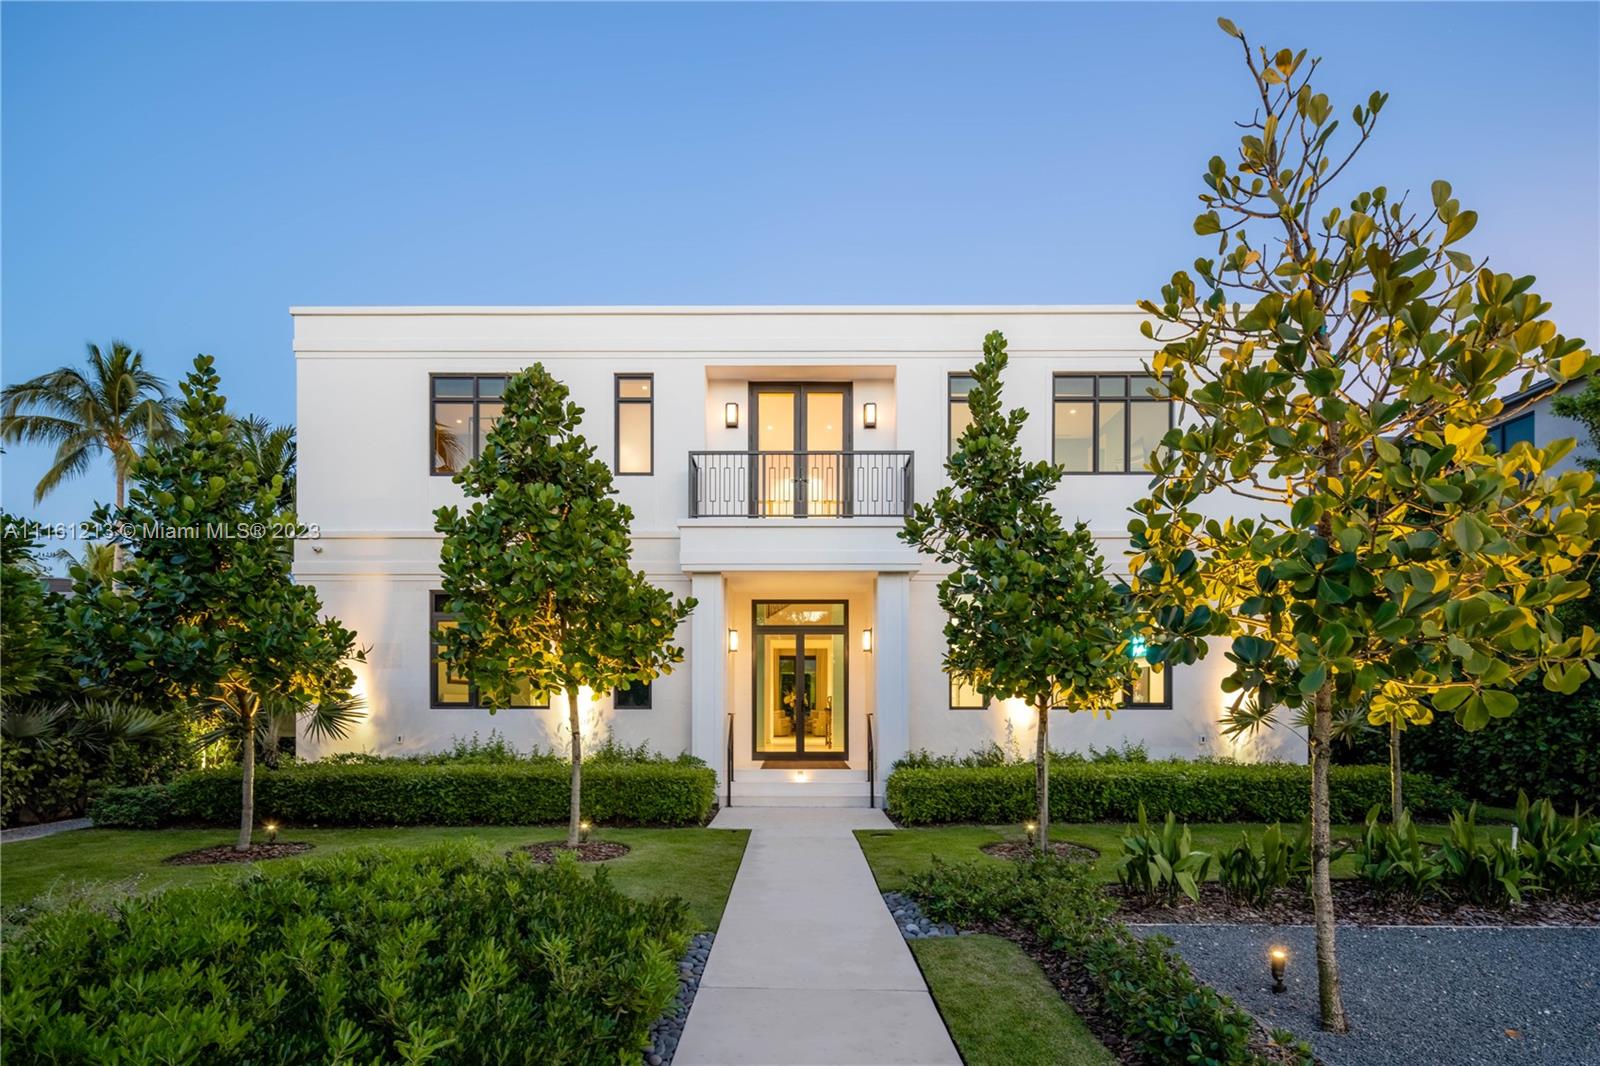 Located on guard-gated Allison Island, this new construction masterpiece was completed at the beginning of 2022. Designed by famed architect, Max Strang, this home leaves nothing to be desired. Sitting on a 16,200 SF lot, this 7,000 SF home boasts six bedrooms and nine bathrooms. The oversized primary suite, facing the Indian Creek waterway, has two separate closets and bathrooms. Kitchens and bathrooms by Boffi, appliances by Wolf and Sub-Zero, this Smart home powered by Savant has it all. Shell stone and white oak flooring throughout are complemented by built-in, custom cabinetry. Enjoy true outdoor living in your large backyard oasis with a full summer kitchen. 75 FT on the water offers the ability to dock your yacht at home. Owner would consider selling with furniture.